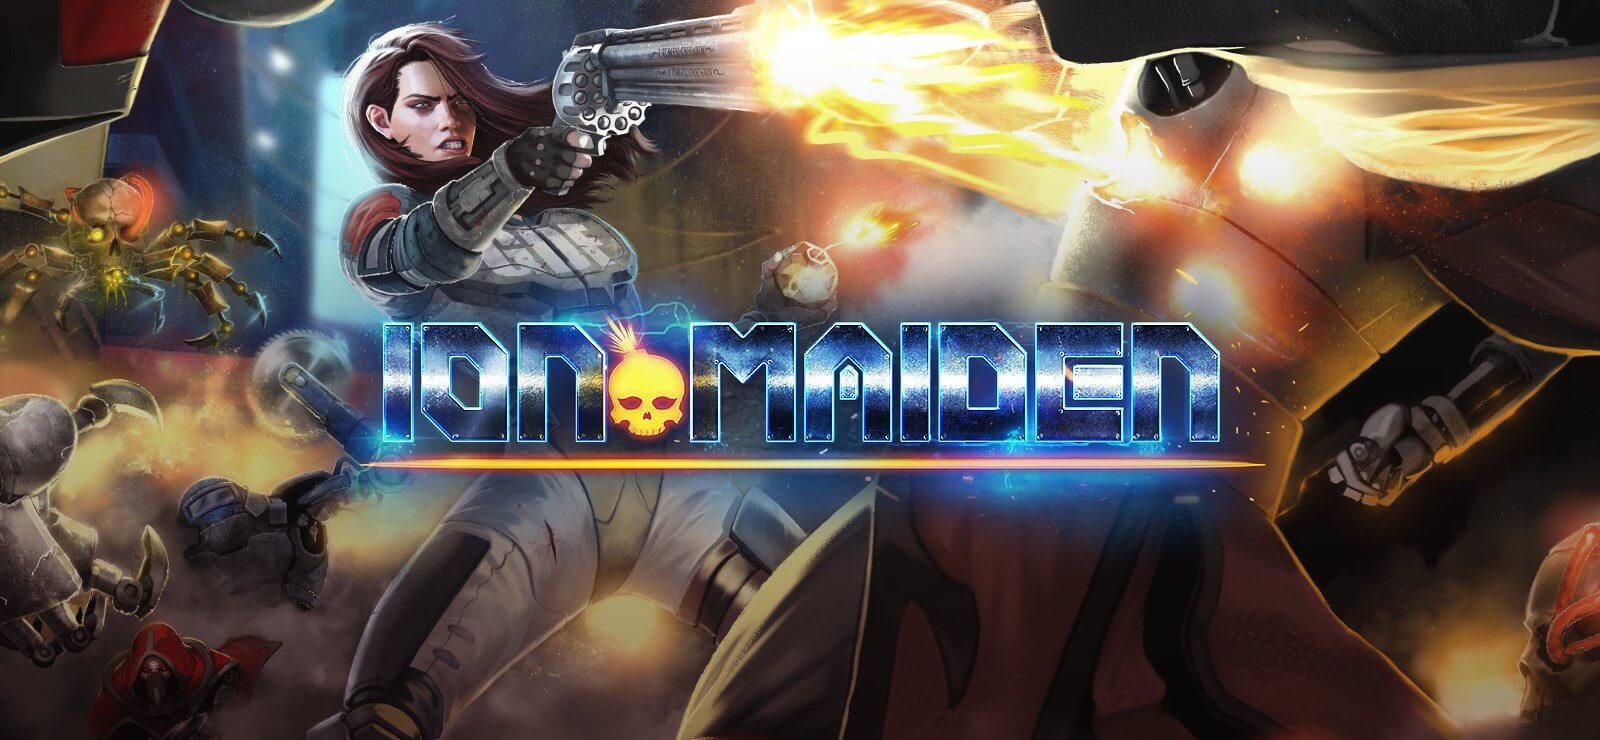 Metal band Iron Maiden launches $2 million trademark infringement lawsuit against Ion Maiden game